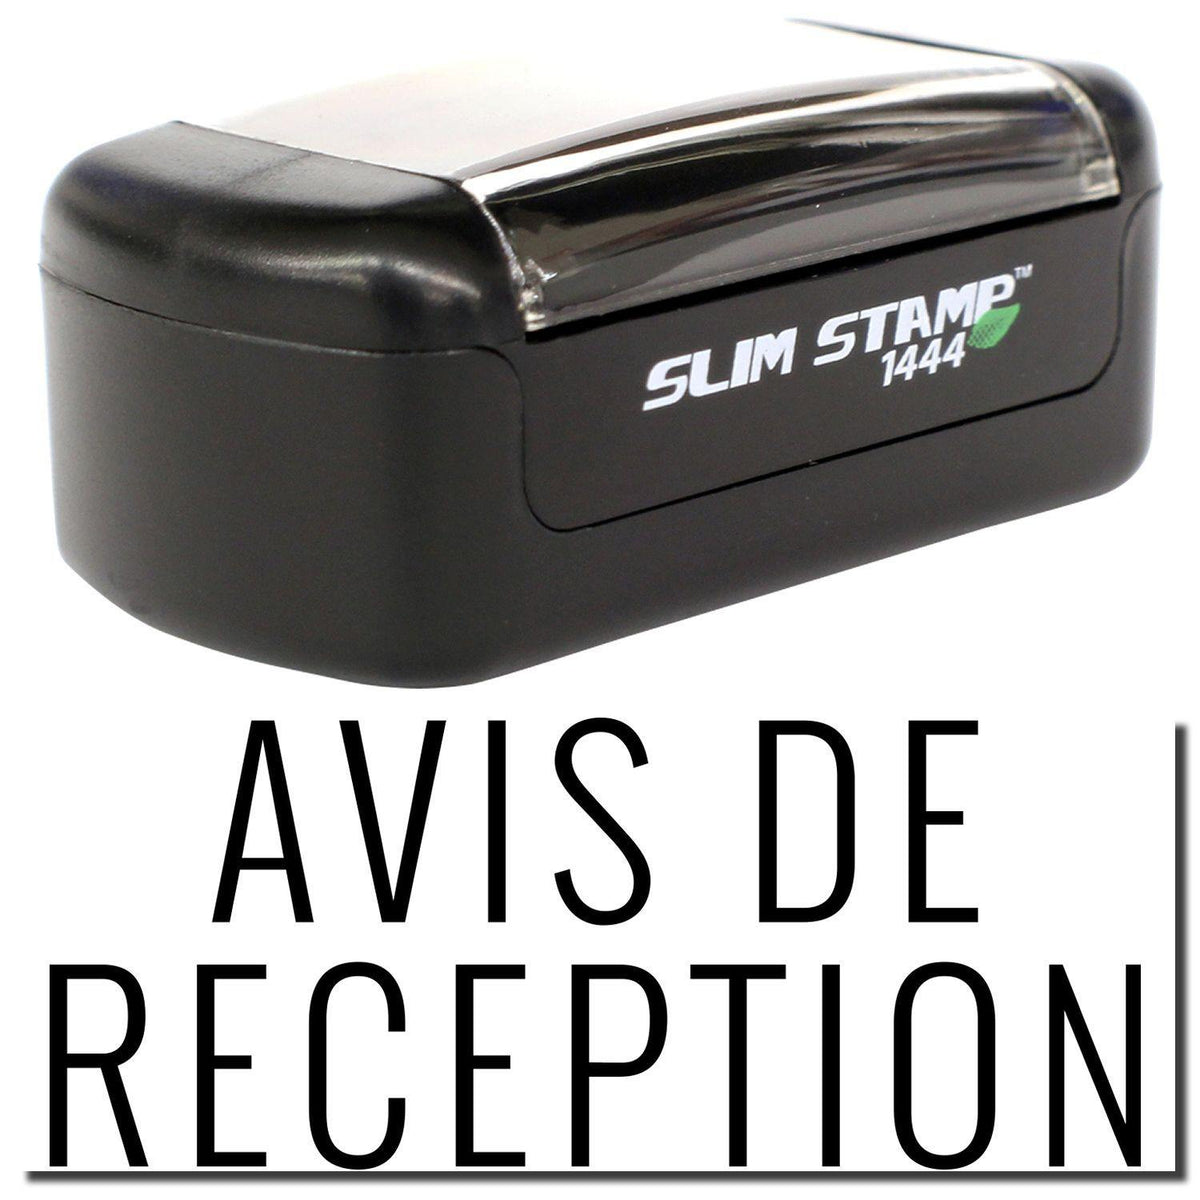 A stock office pre-inked stamp with a stamped image showing how the text &quot;AVIS DE RECEPTION&quot; is displayed after stamping.